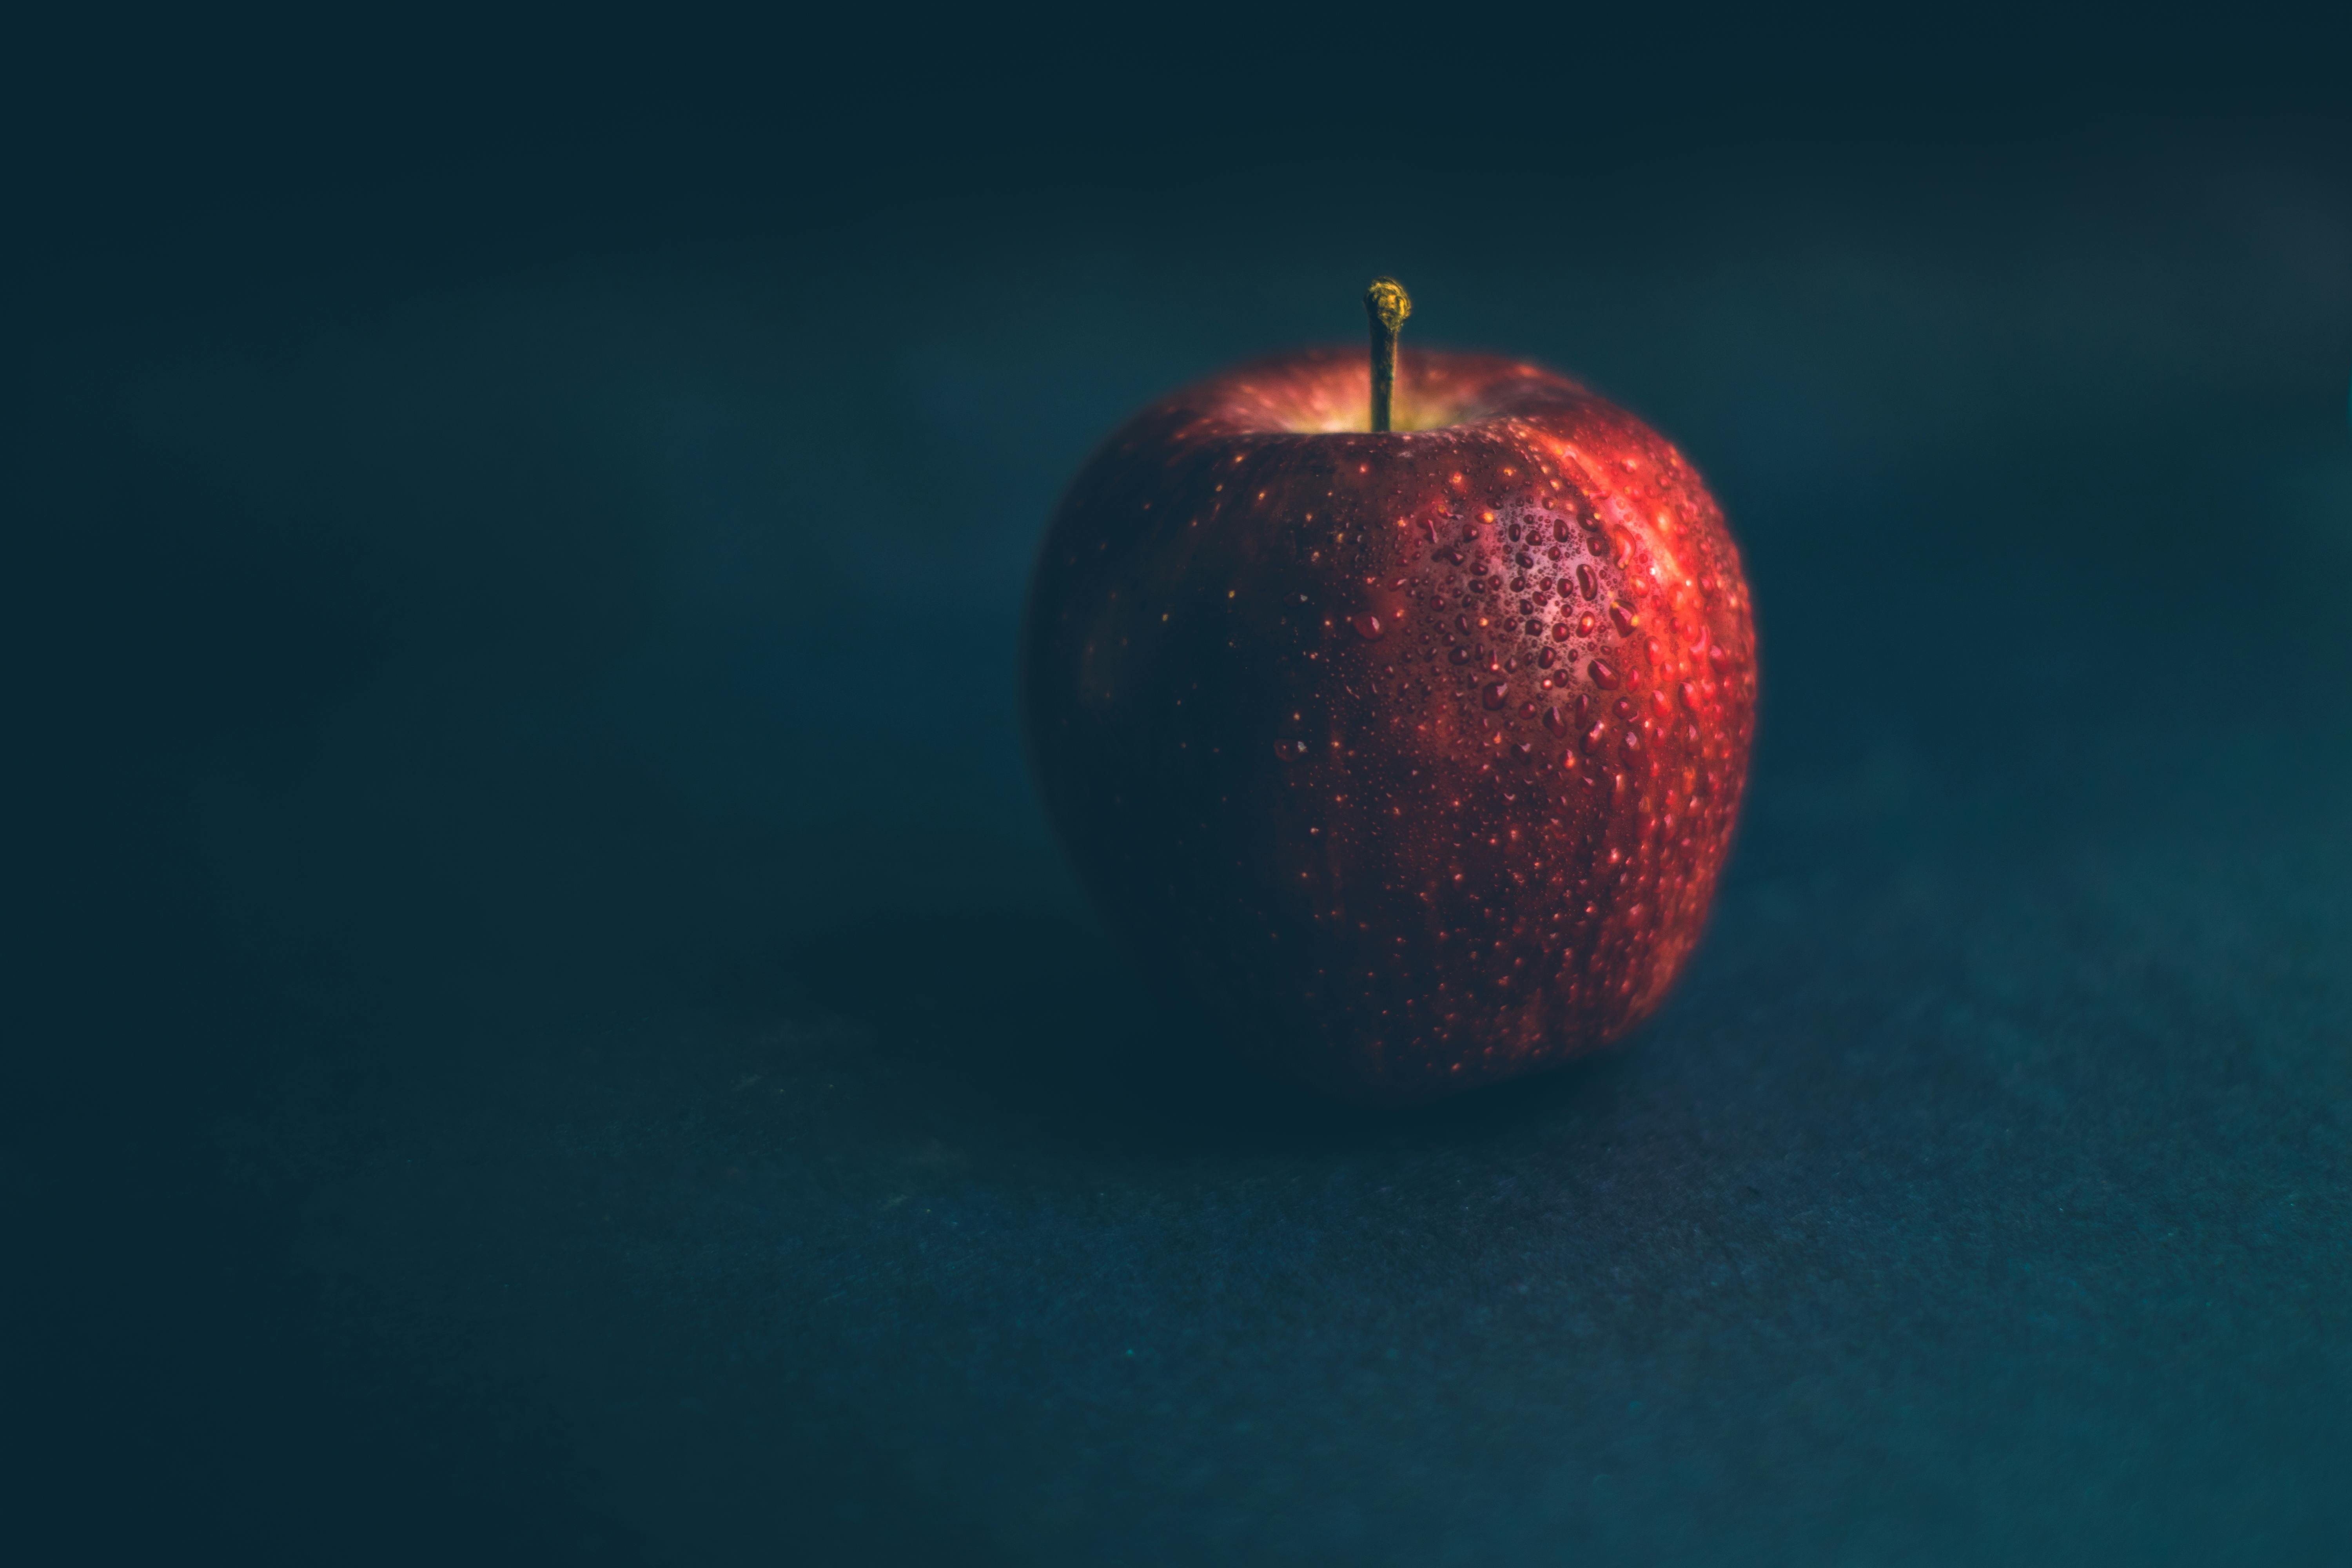 Red Apple Photos, Download The BEST Free Red Apple Stock Photos & HD Images